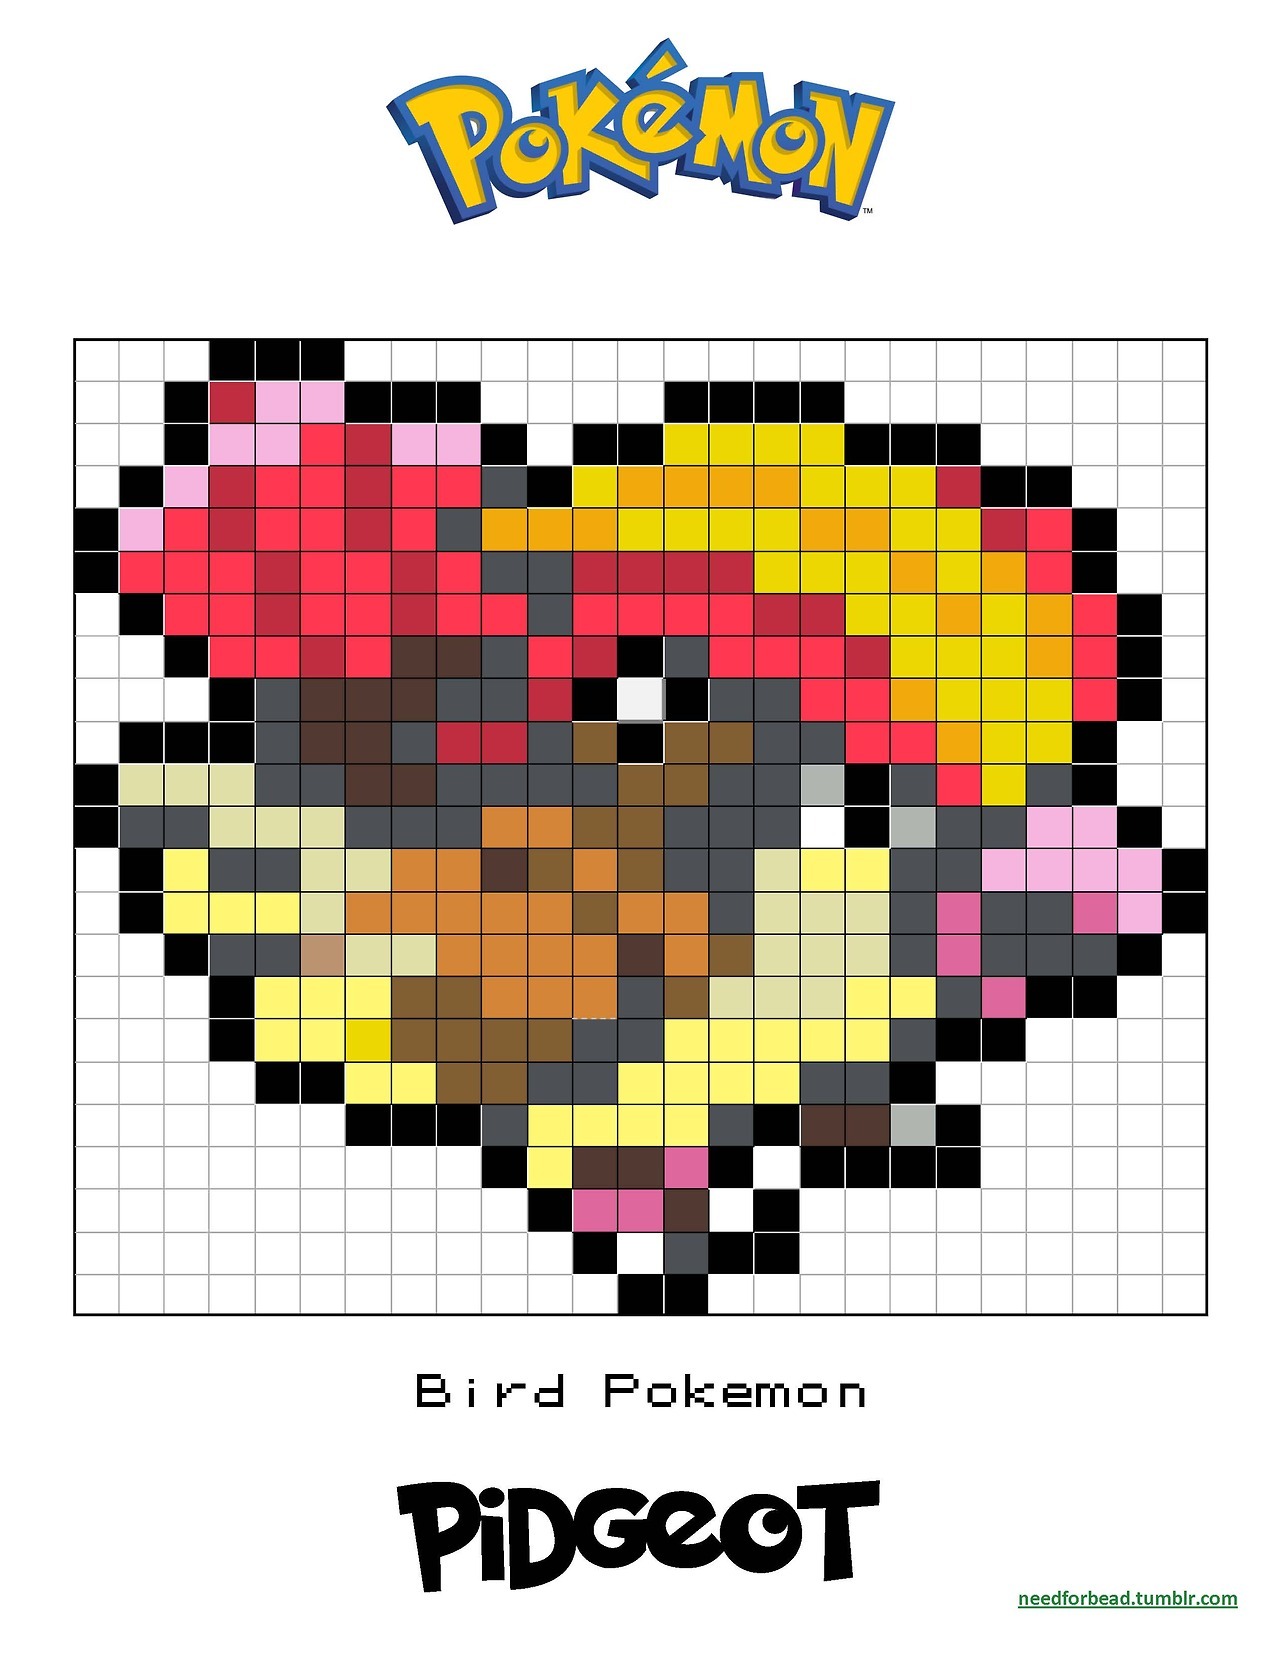 December Pokemon Challenge Day 2: FLYING TYPE... - Need for Bead